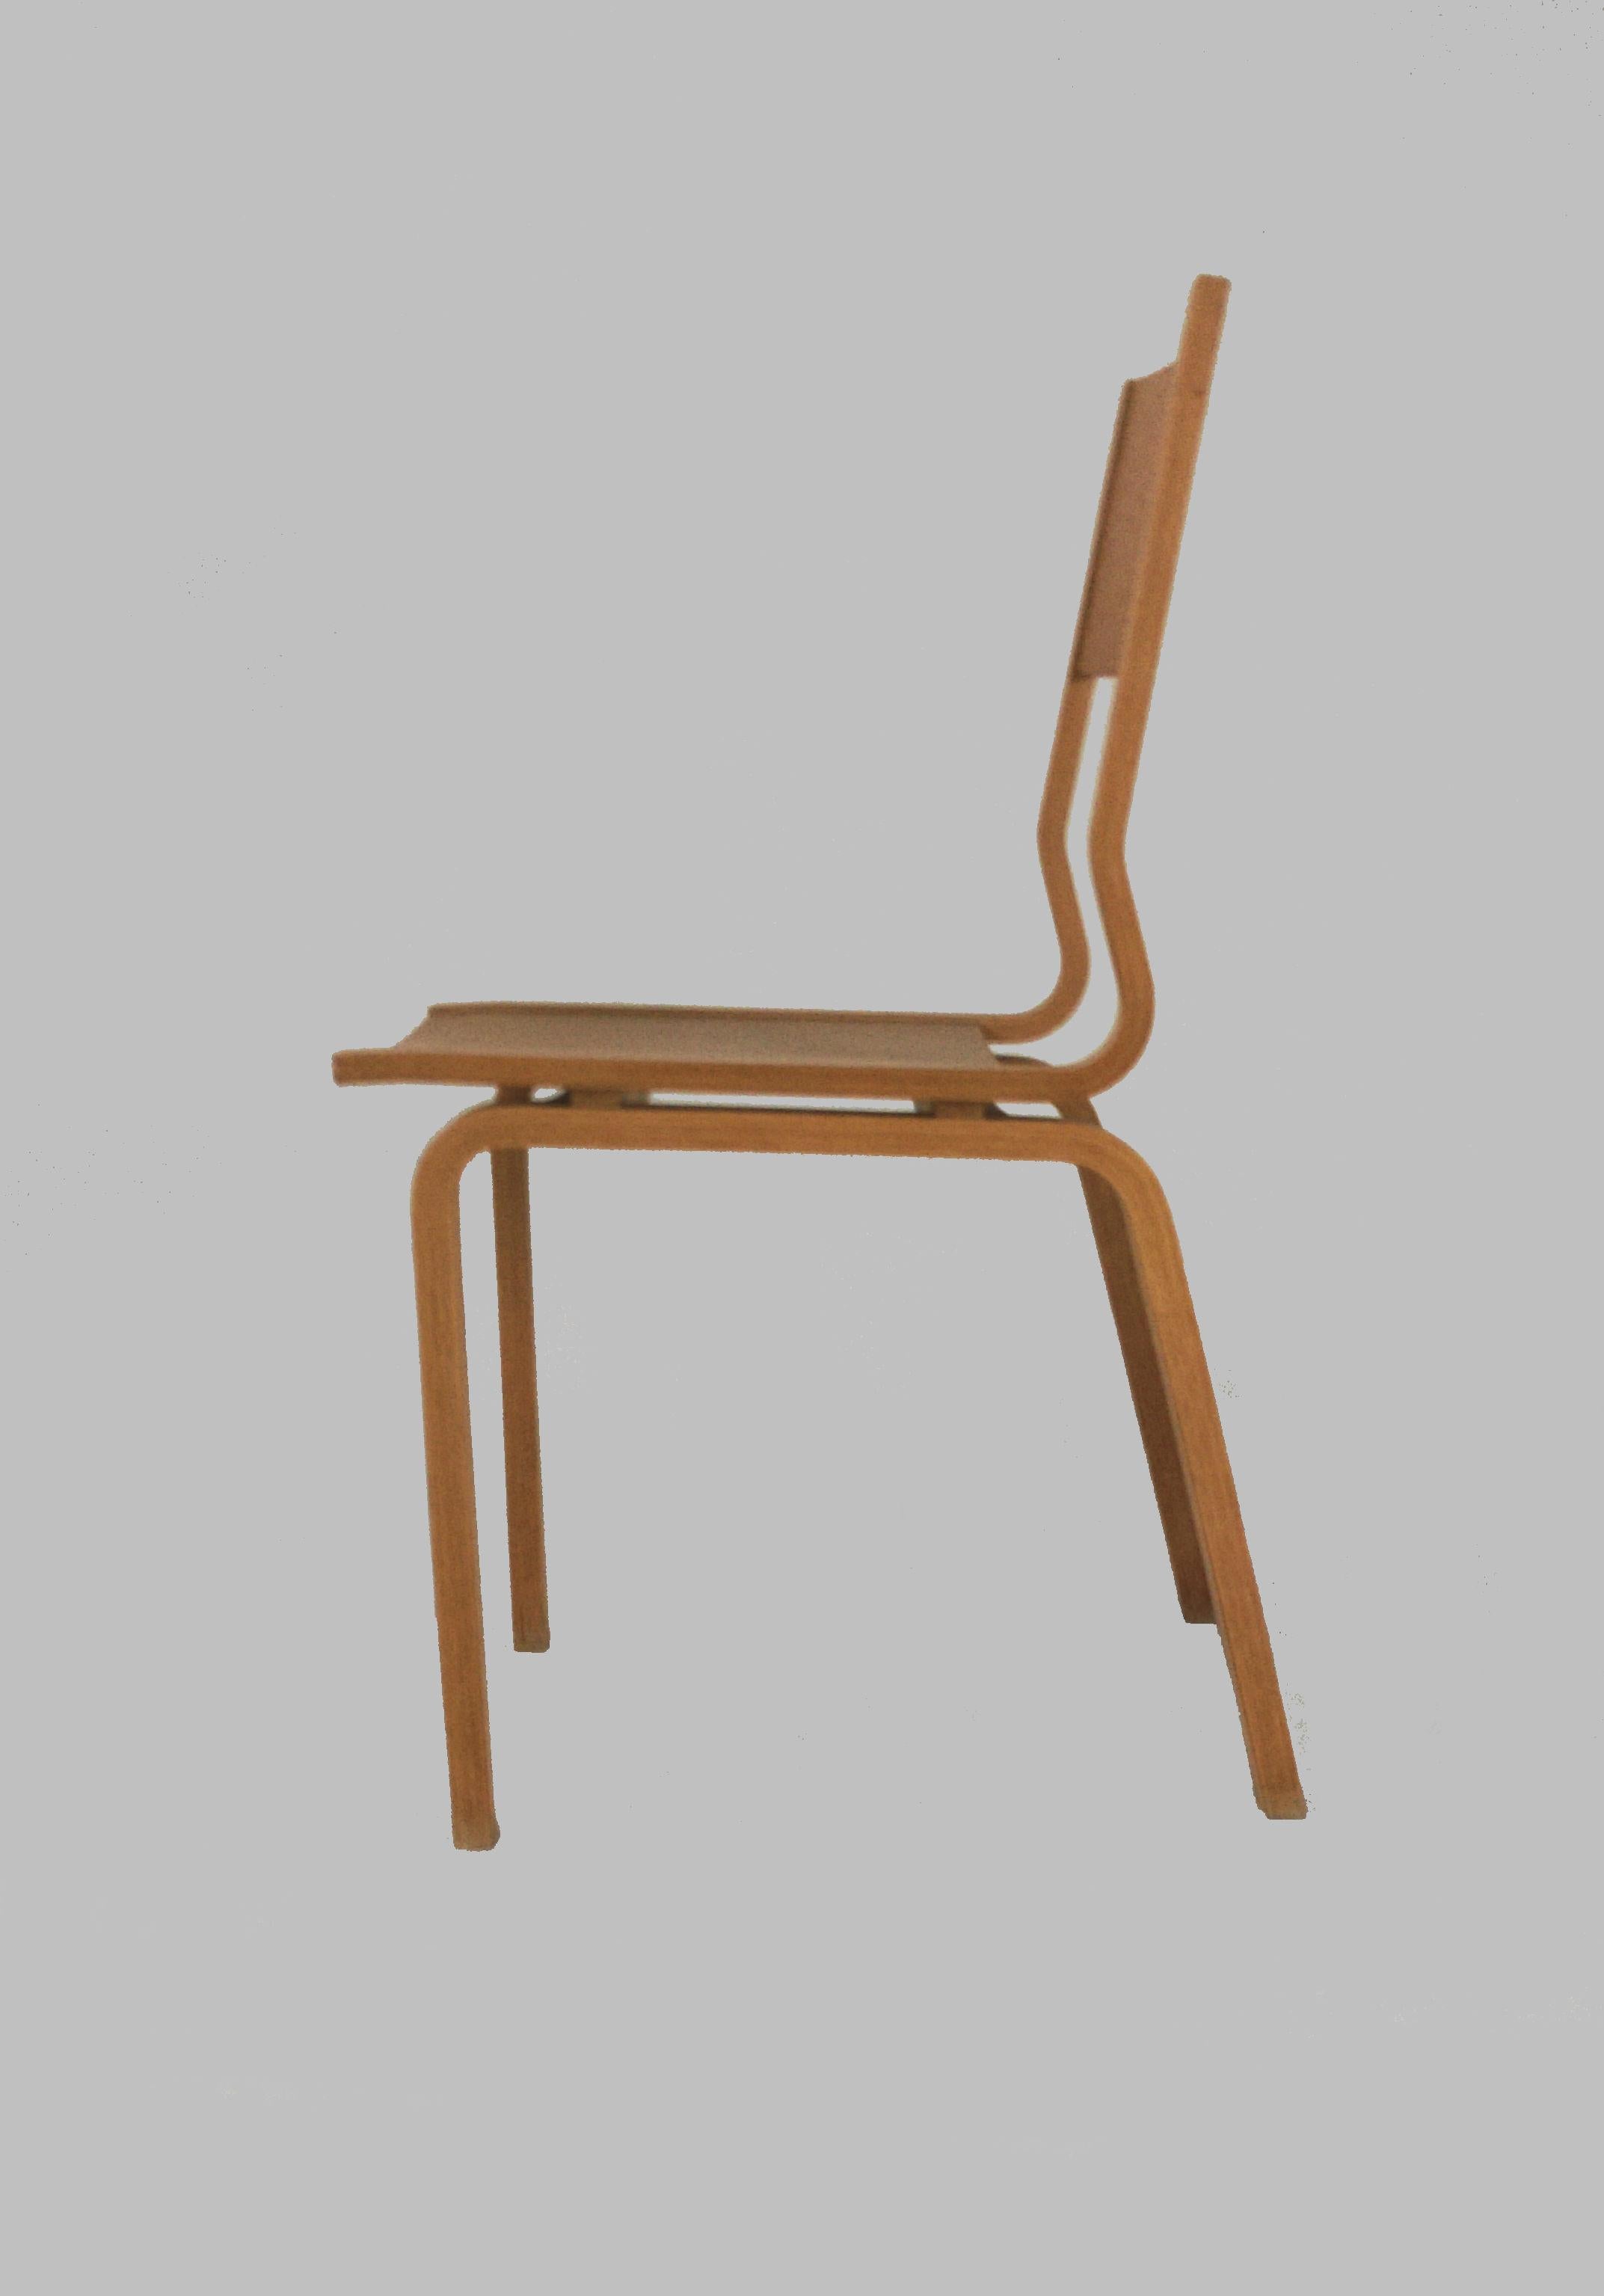 Danish 1965 Arne Jacobsen Set of Two Saint Catherines Chairs in Laminated Oak